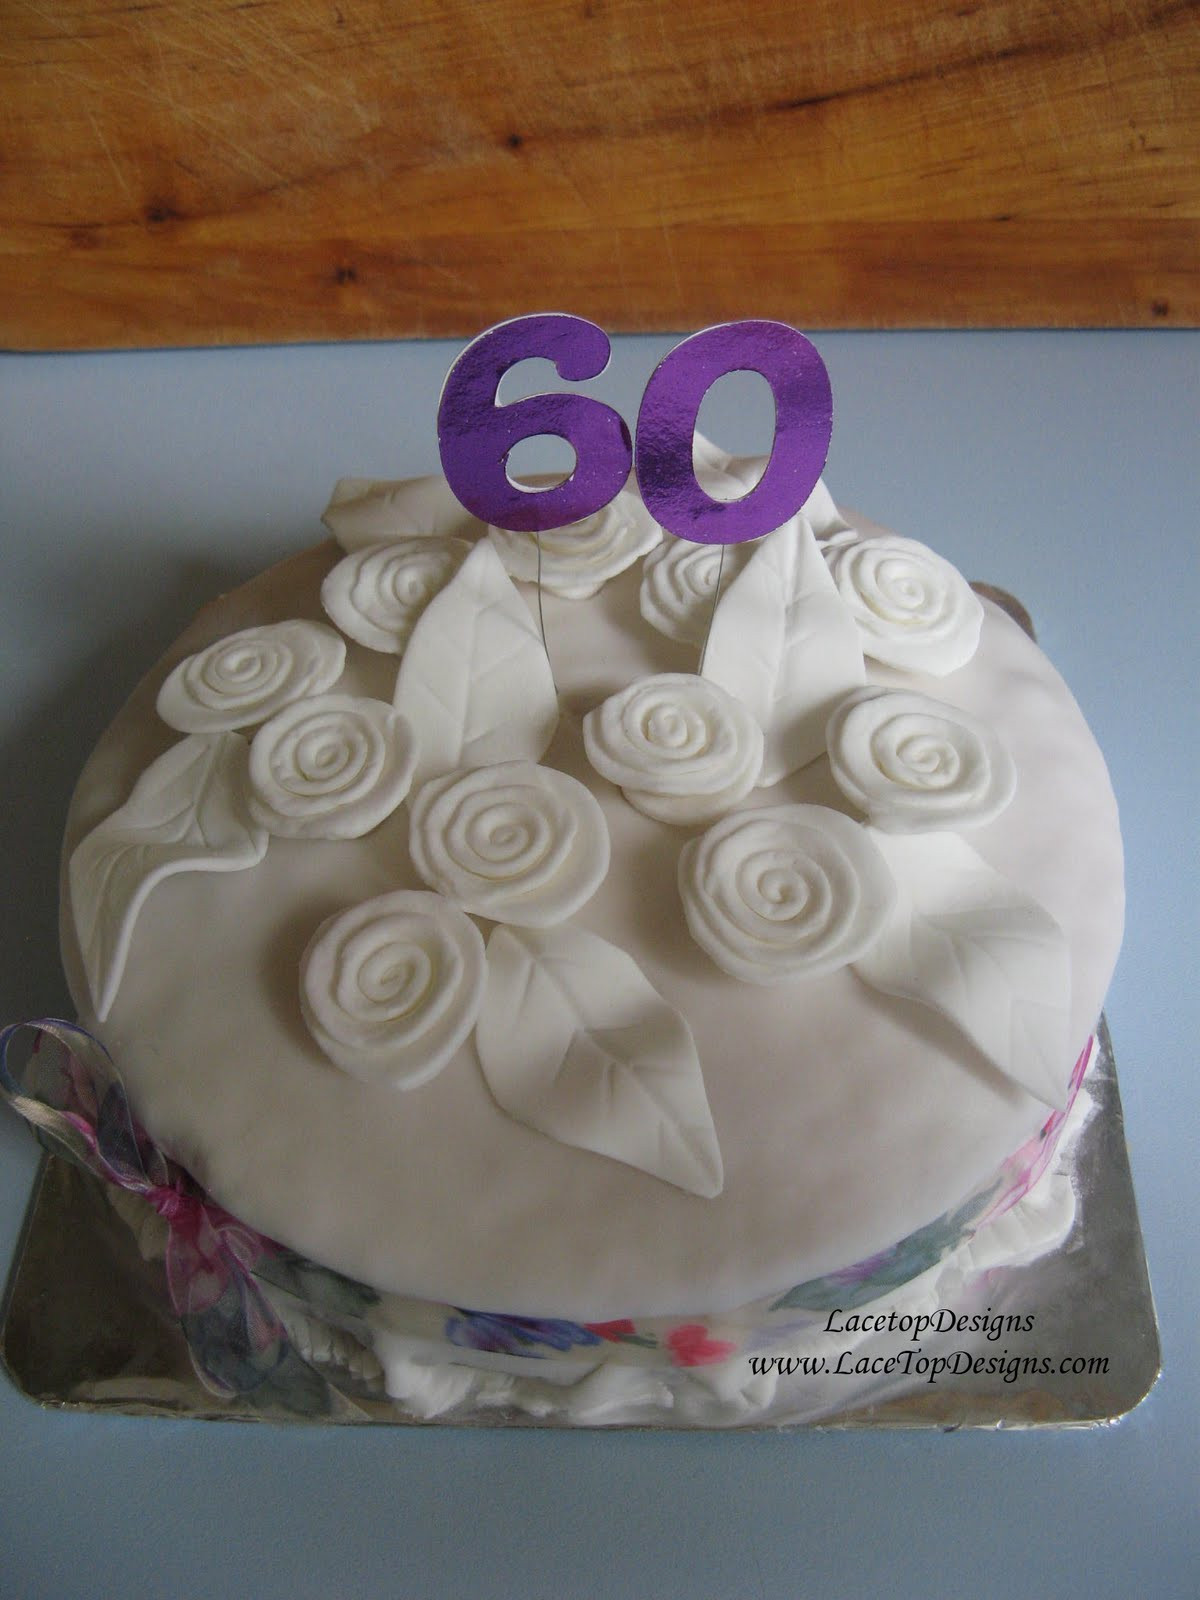 60th Birthday Cakes For Her
 LaceTopDesigns 60th Birthday Rolled Rose Cake